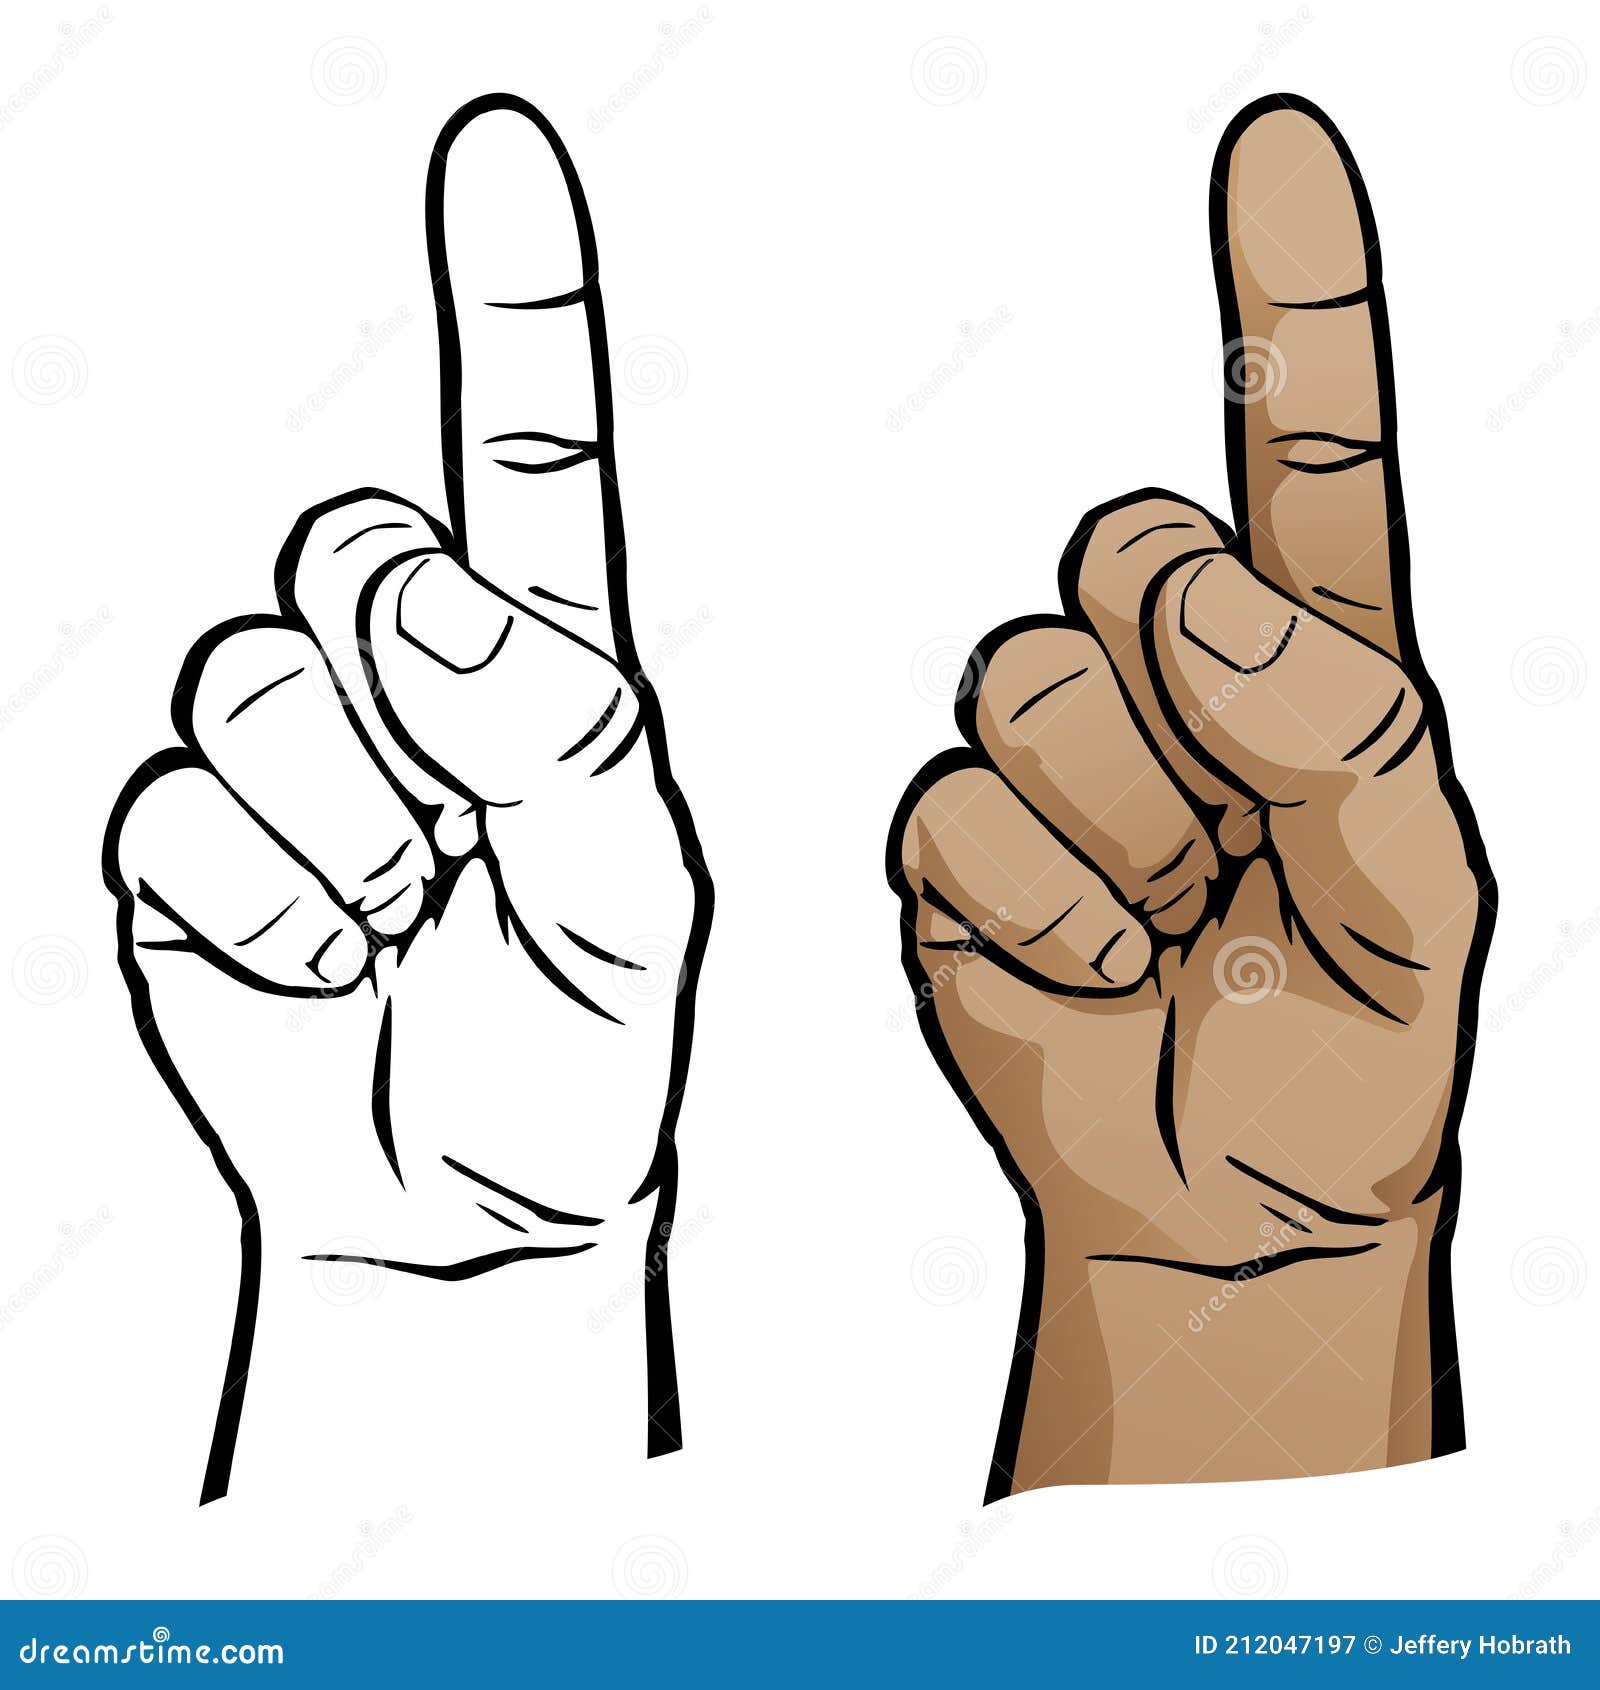 thumbs./z/number-one-hand-finger-poi